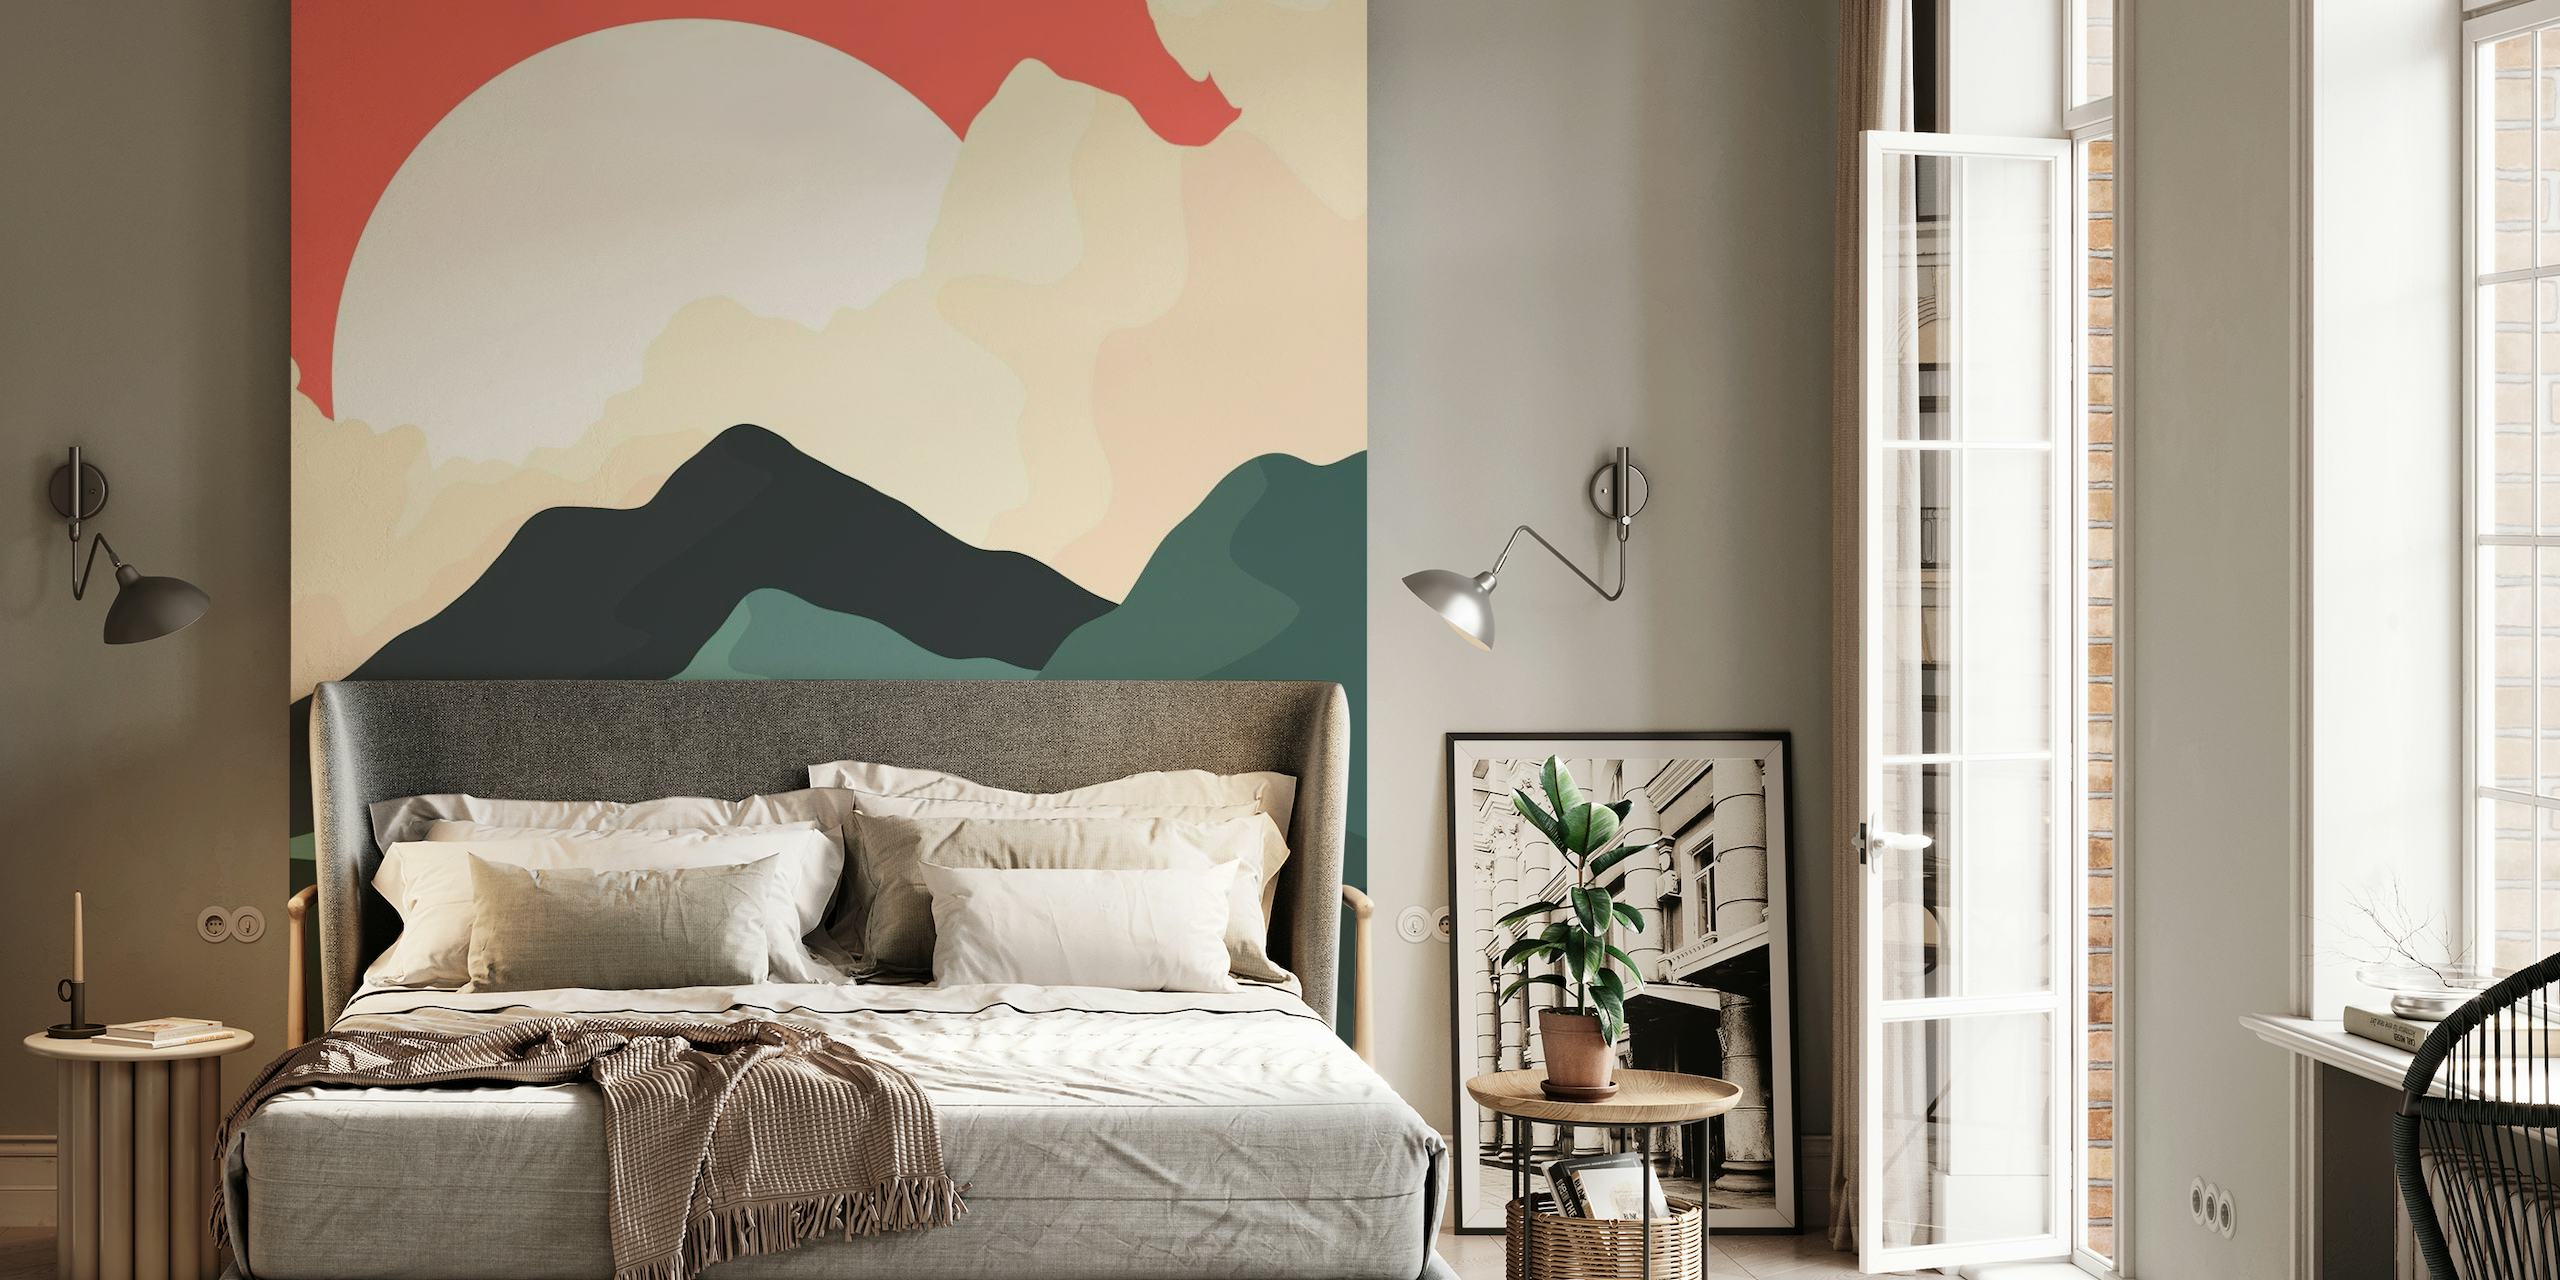 Abstract mountain range wall mural with dark green peaks and a warm sunset sky